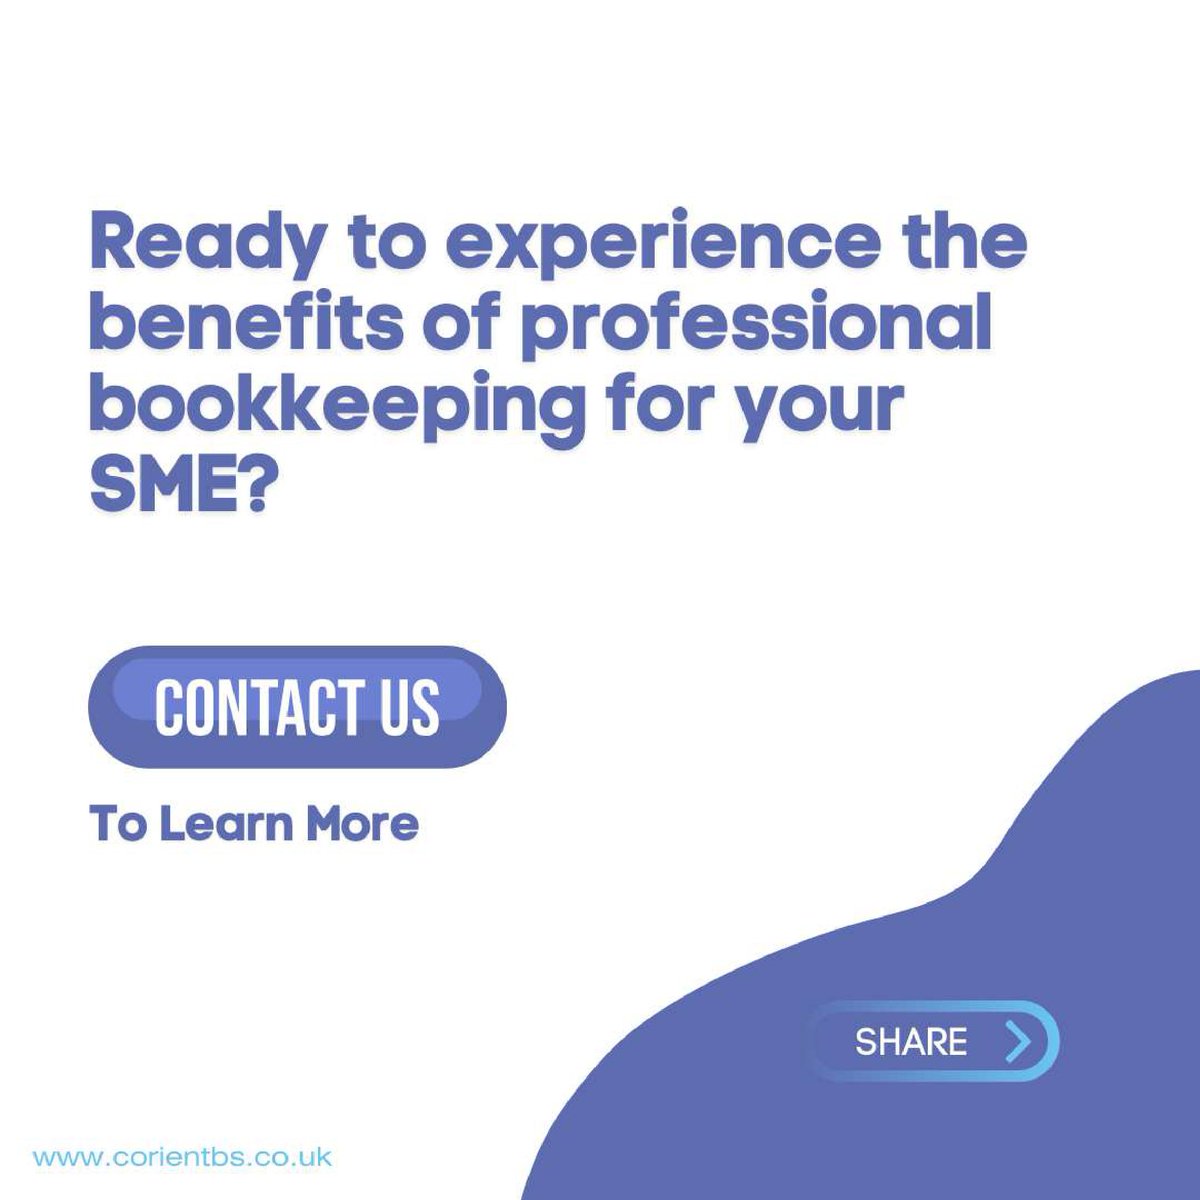 Unlock the power of bookkeeping for your SME with Corient's expert services! 
Swipe through to discover how bookkeeping can transform your financial management game!

#SMEsSuccess #SmartBusinessMoves #TrackYourGrowth #TaxSeasonReady #BookkeepingBenefits #FinancialClarity